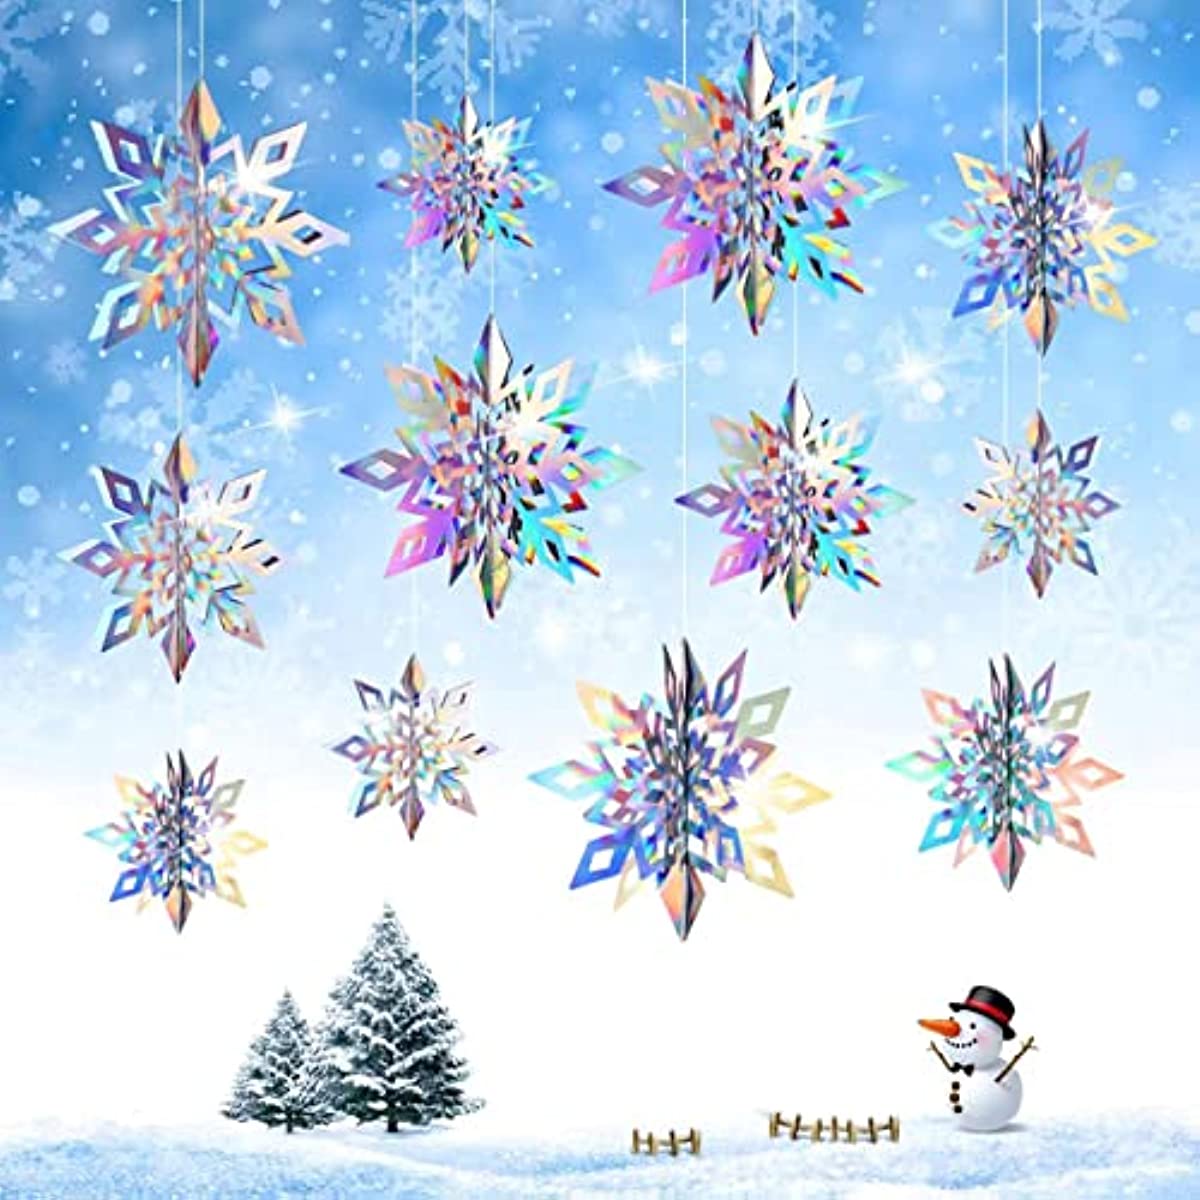  12Pcs Christmas Hanging Snowflake Decorations, 3D White  Snowflake Ornaments for Winter Wonderland Decorations Frozen Birthday Party  Supplies, Snowflakes for Christmas Decorations Indoor Home Decor : Home &  Kitchen